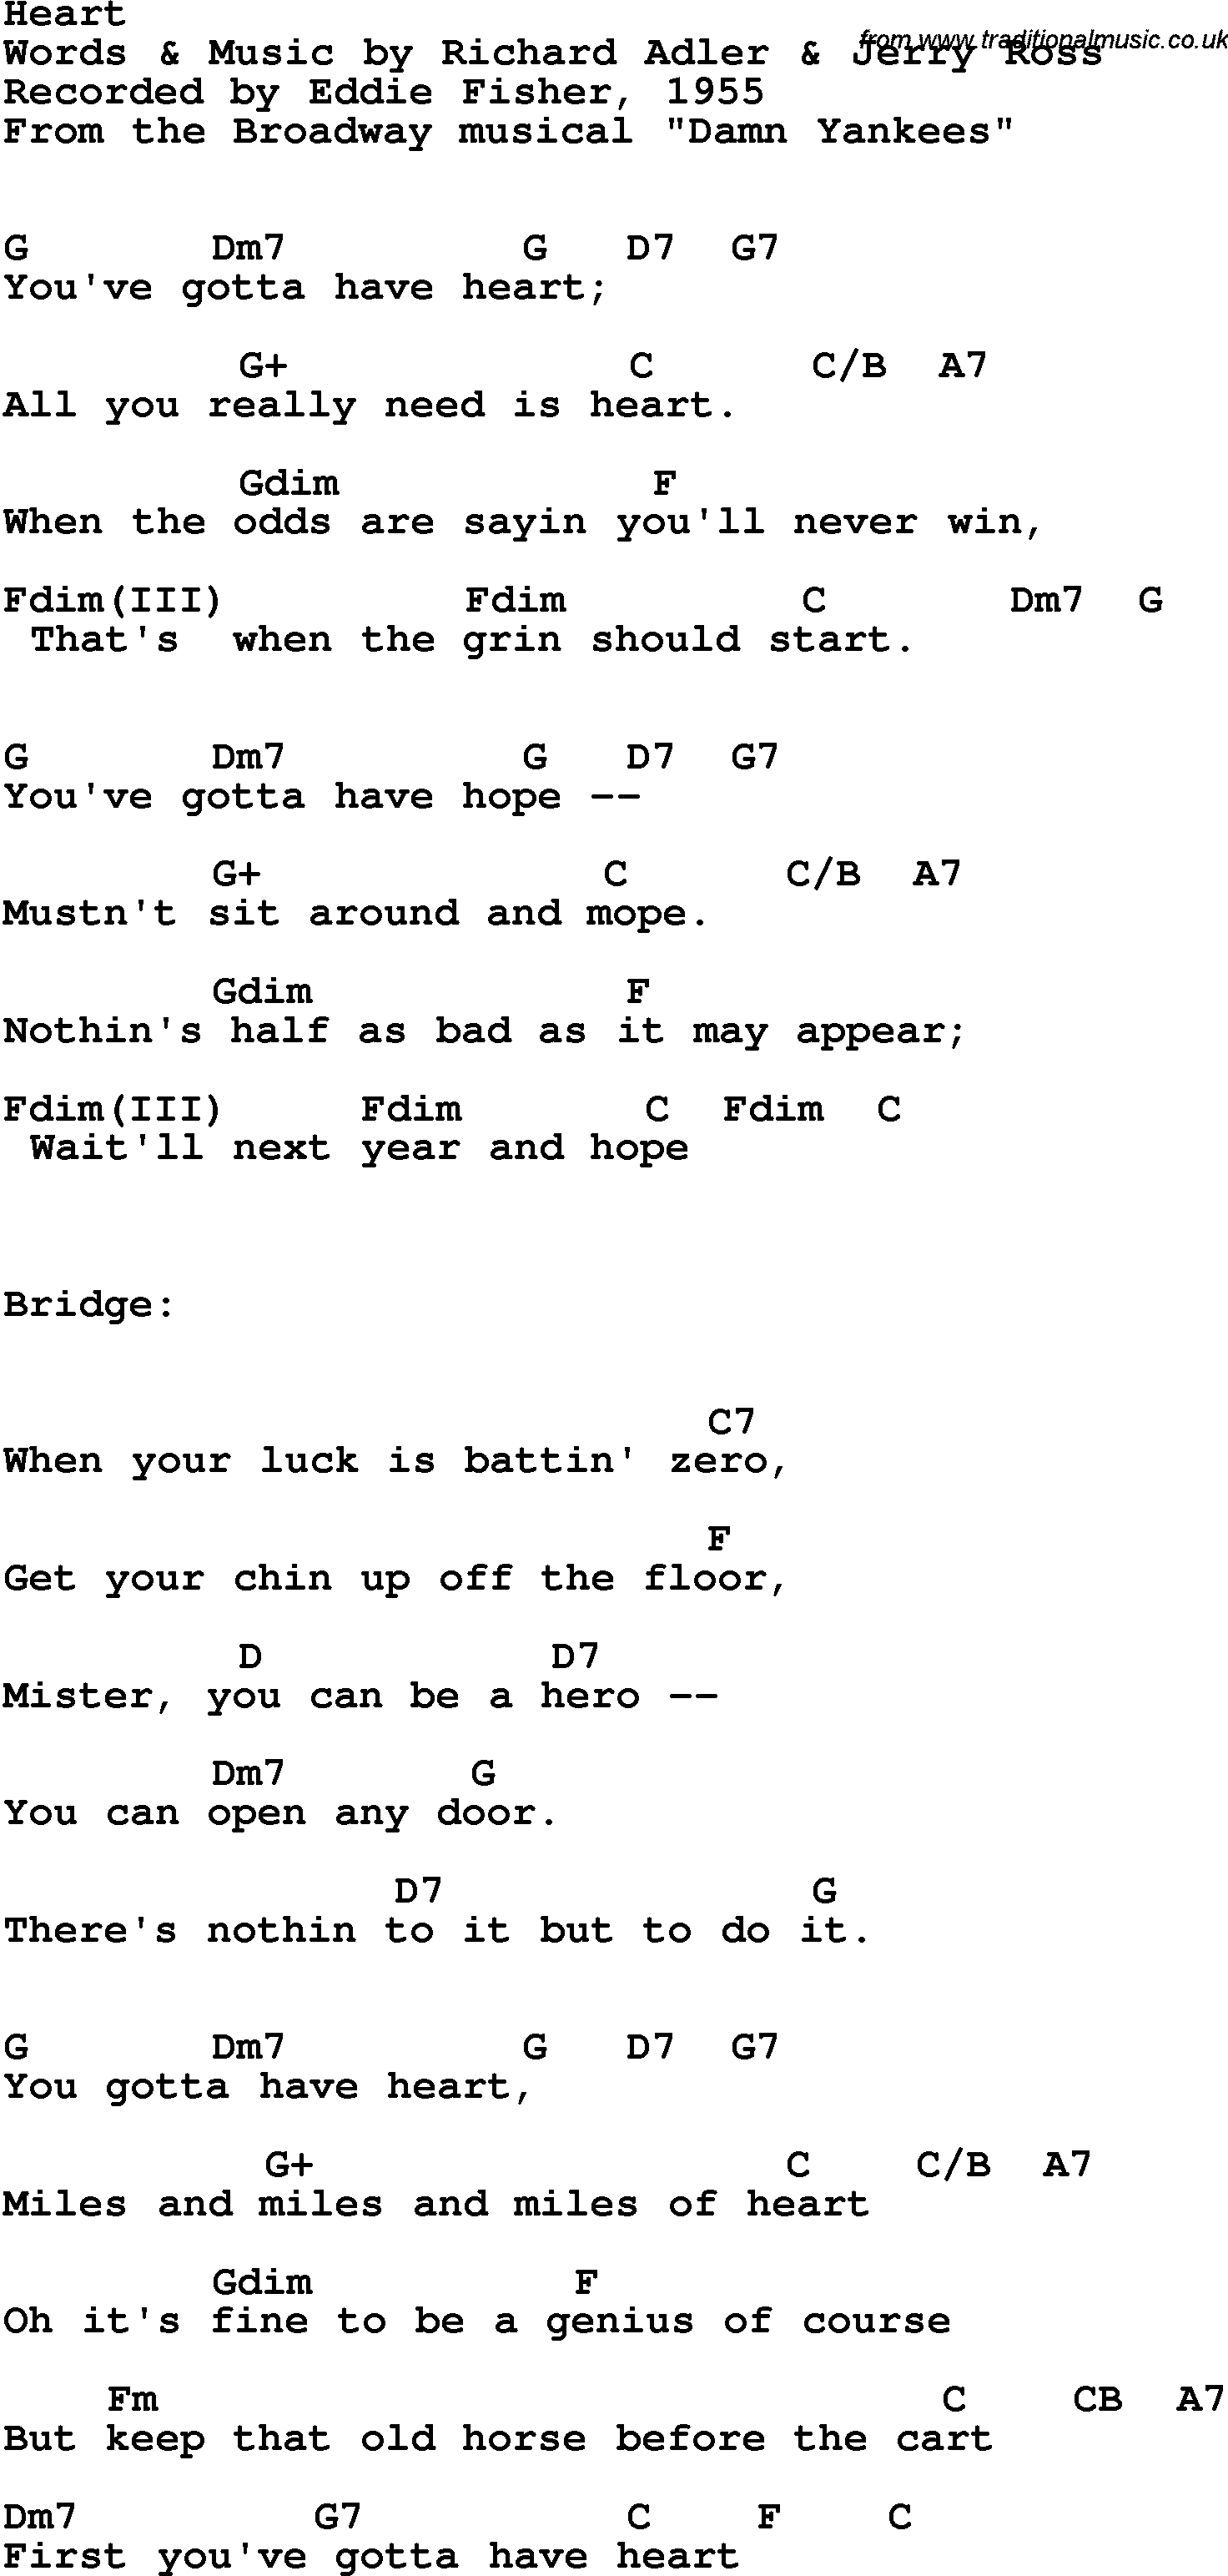 Song Lyrics with guitar chords for Heart - Eddie Fisher, 1955